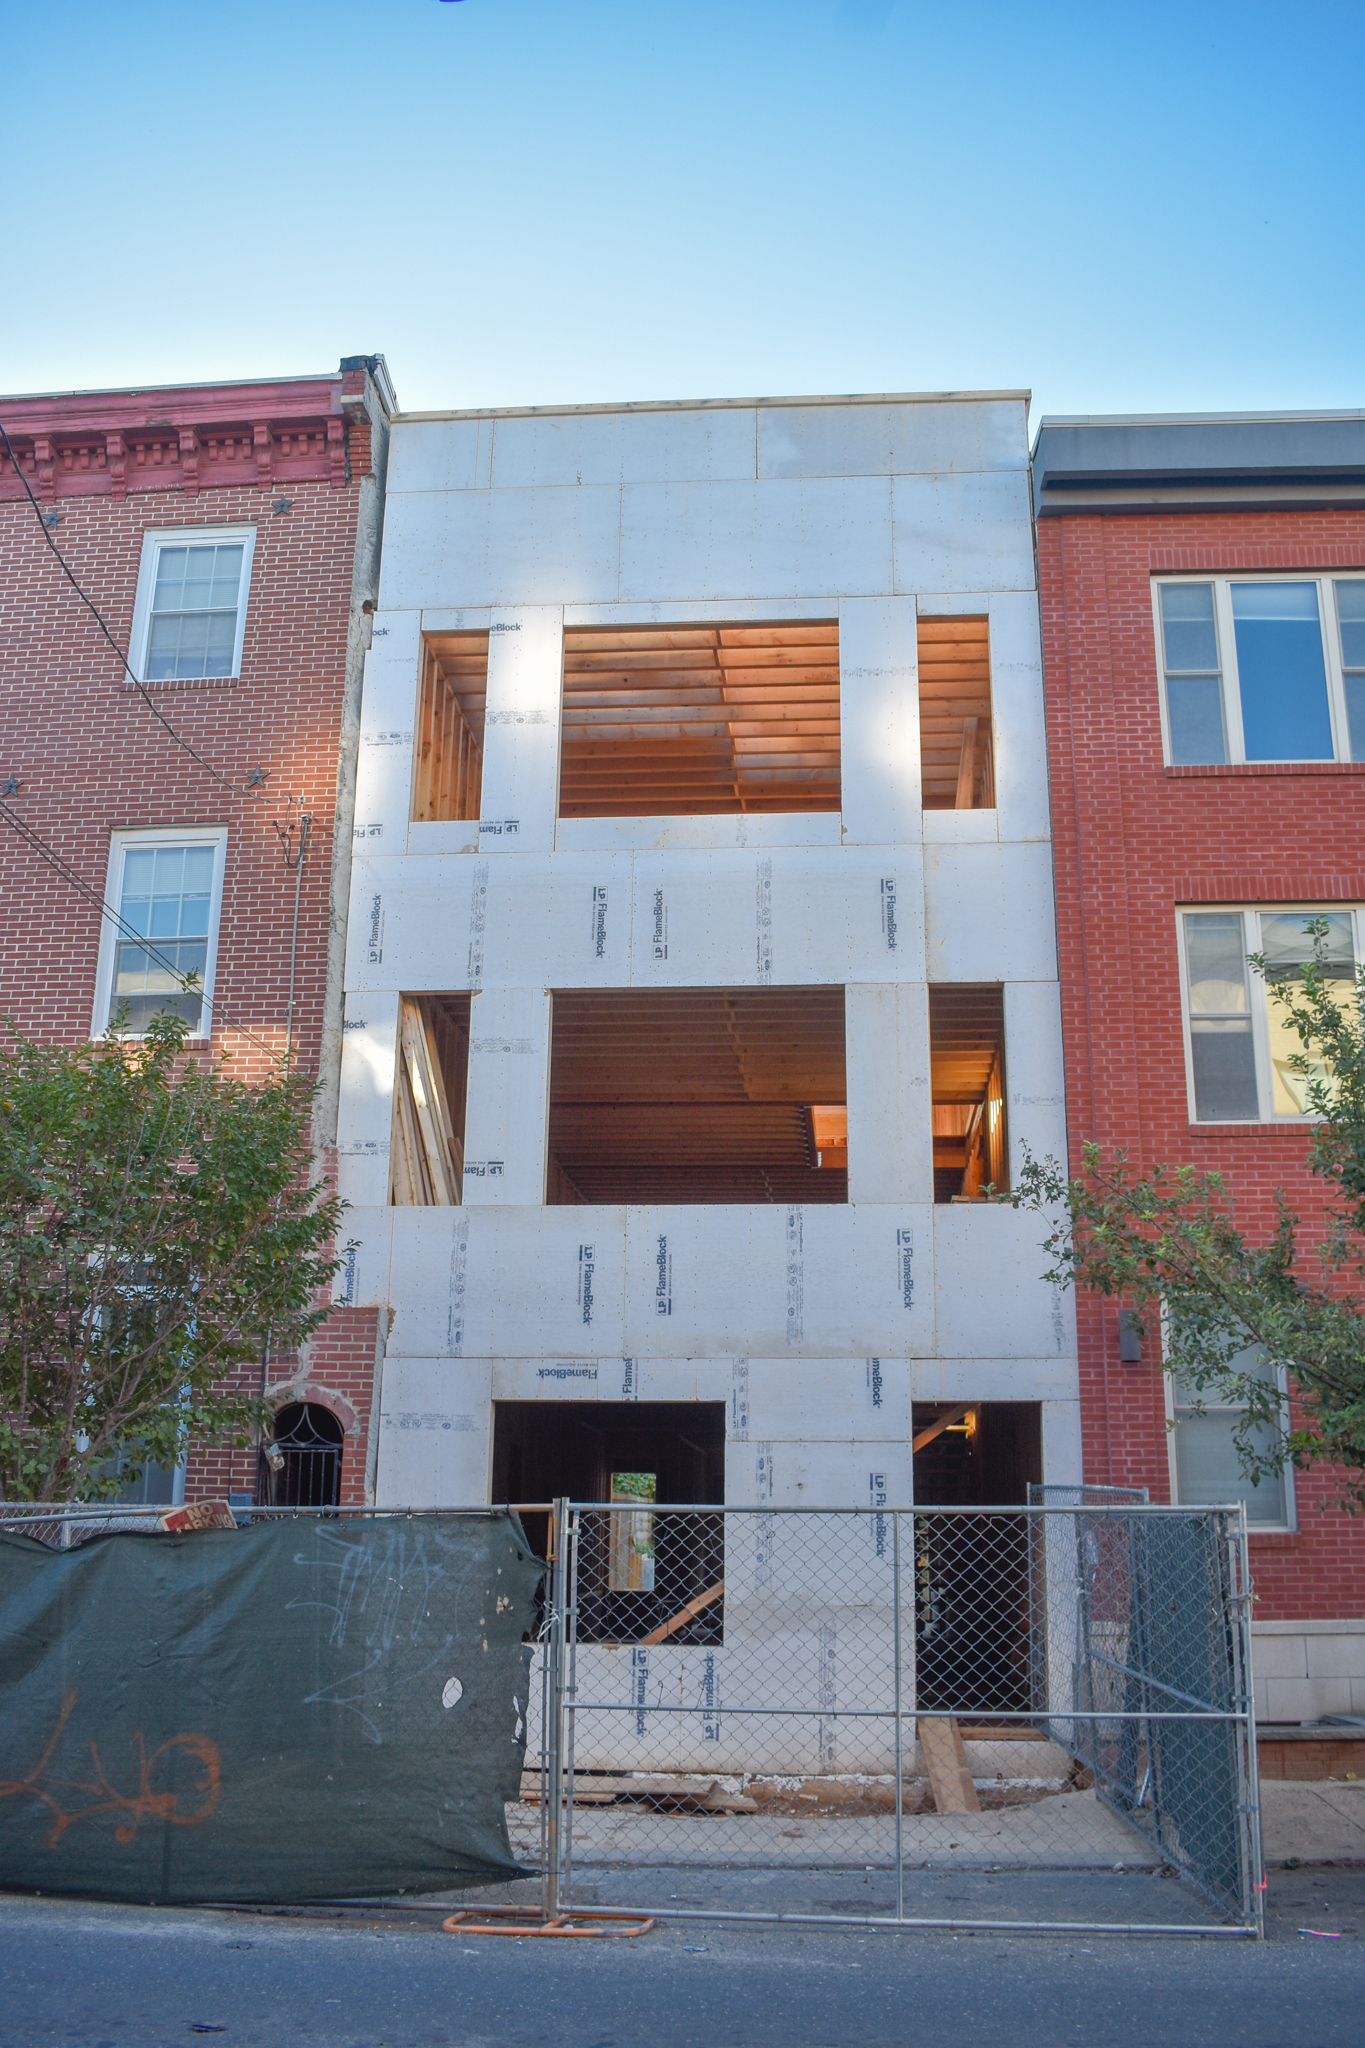 1312 North 6th Street. Photo by Jamie Meller. October 2022